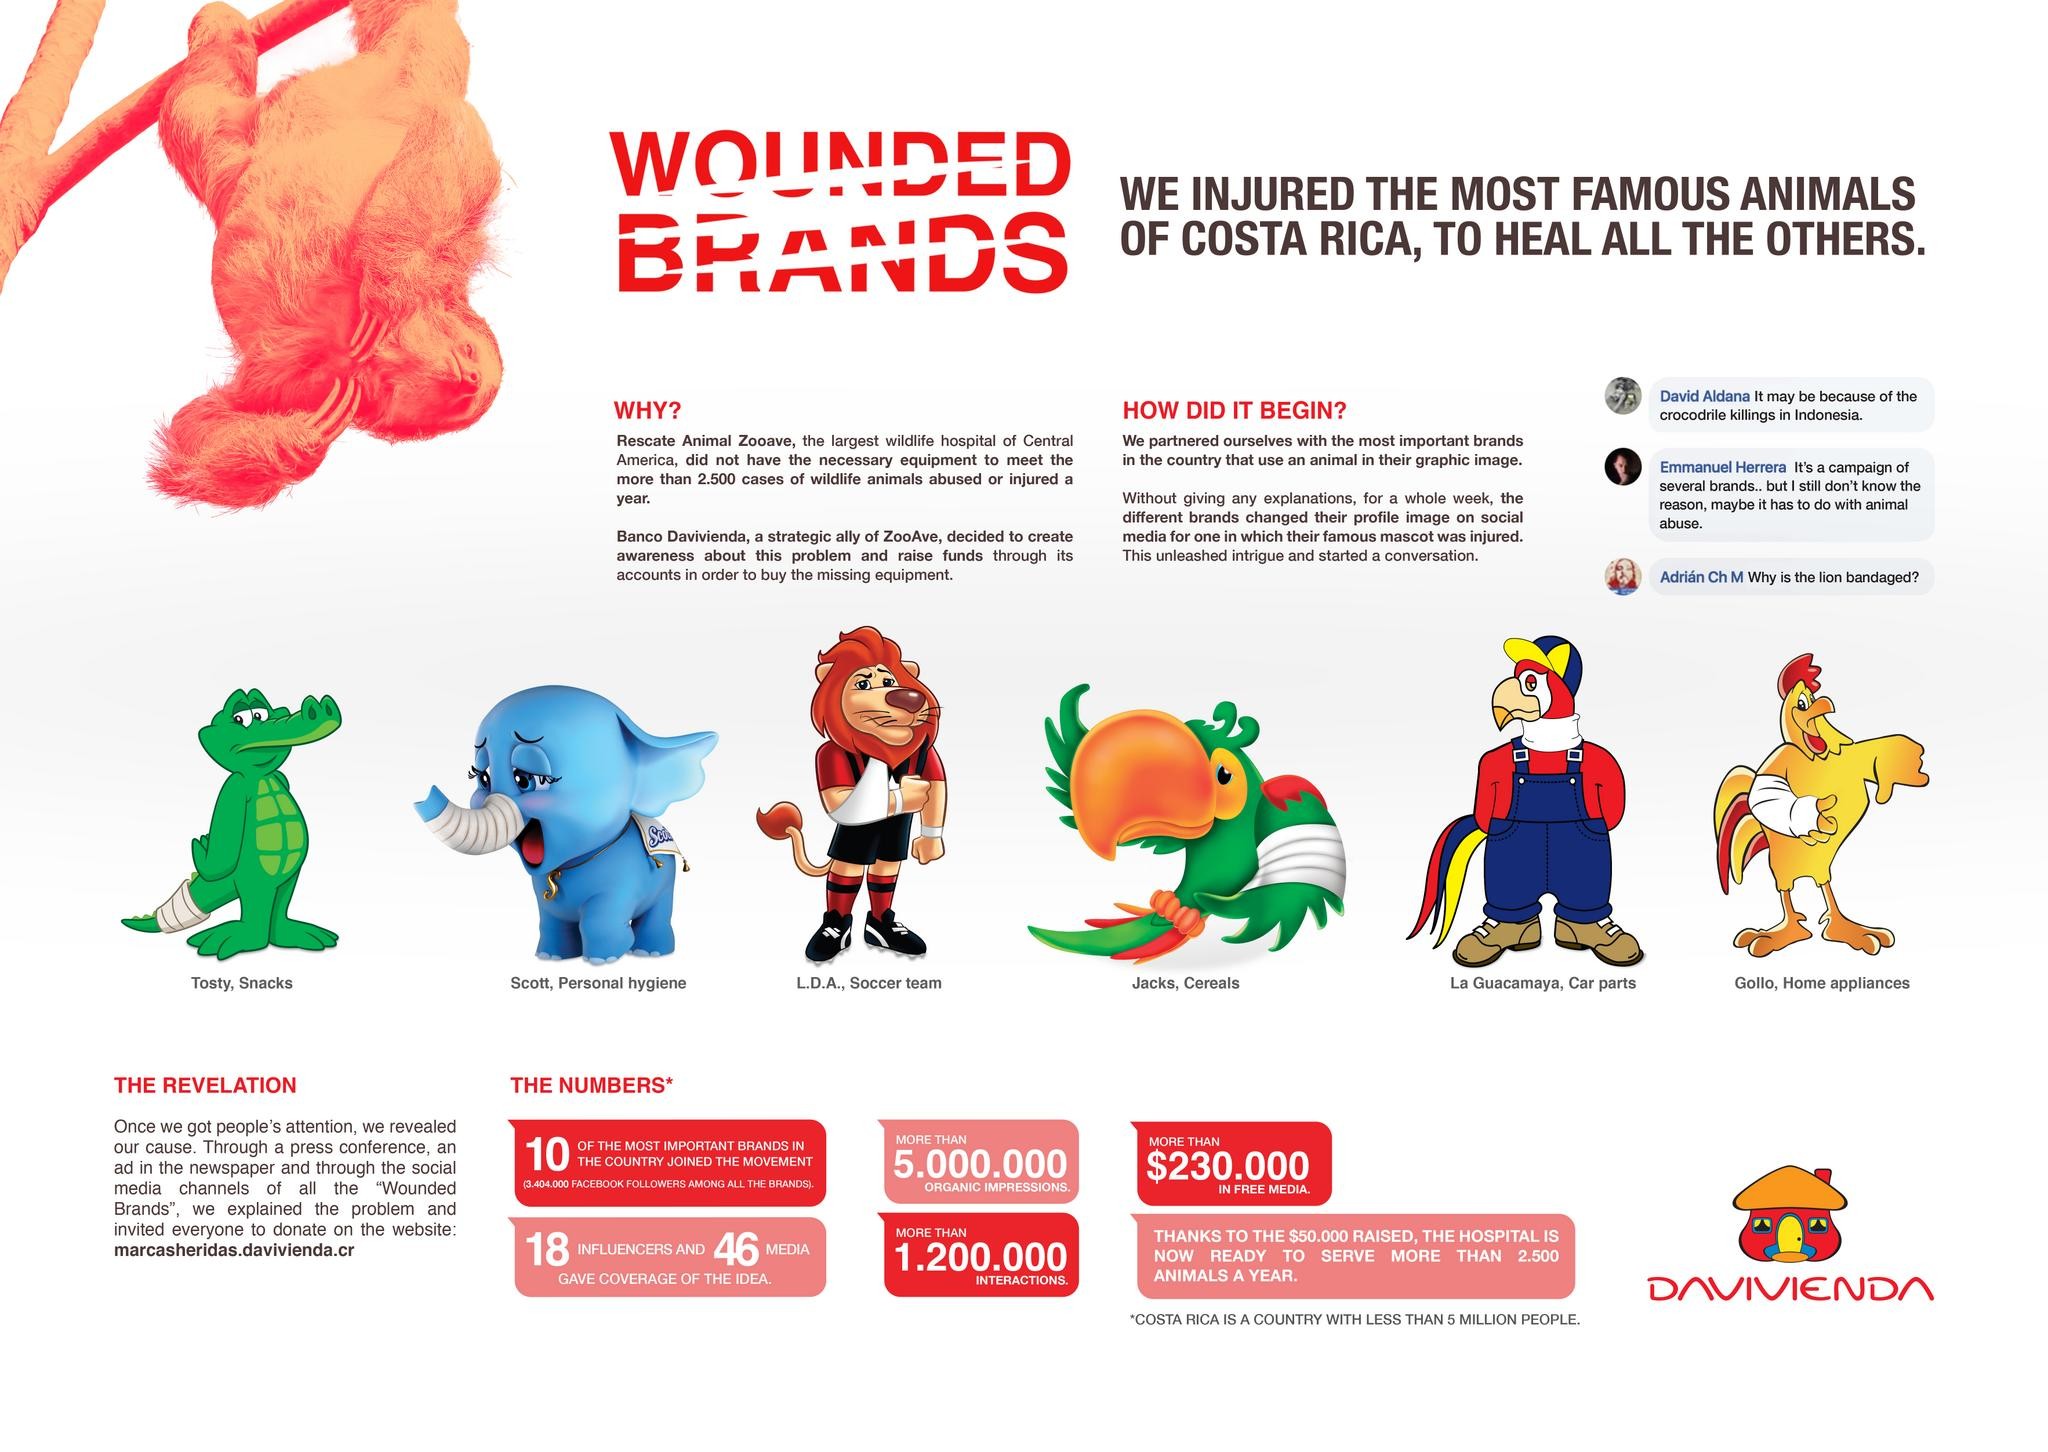 WOUNDED BRANDS